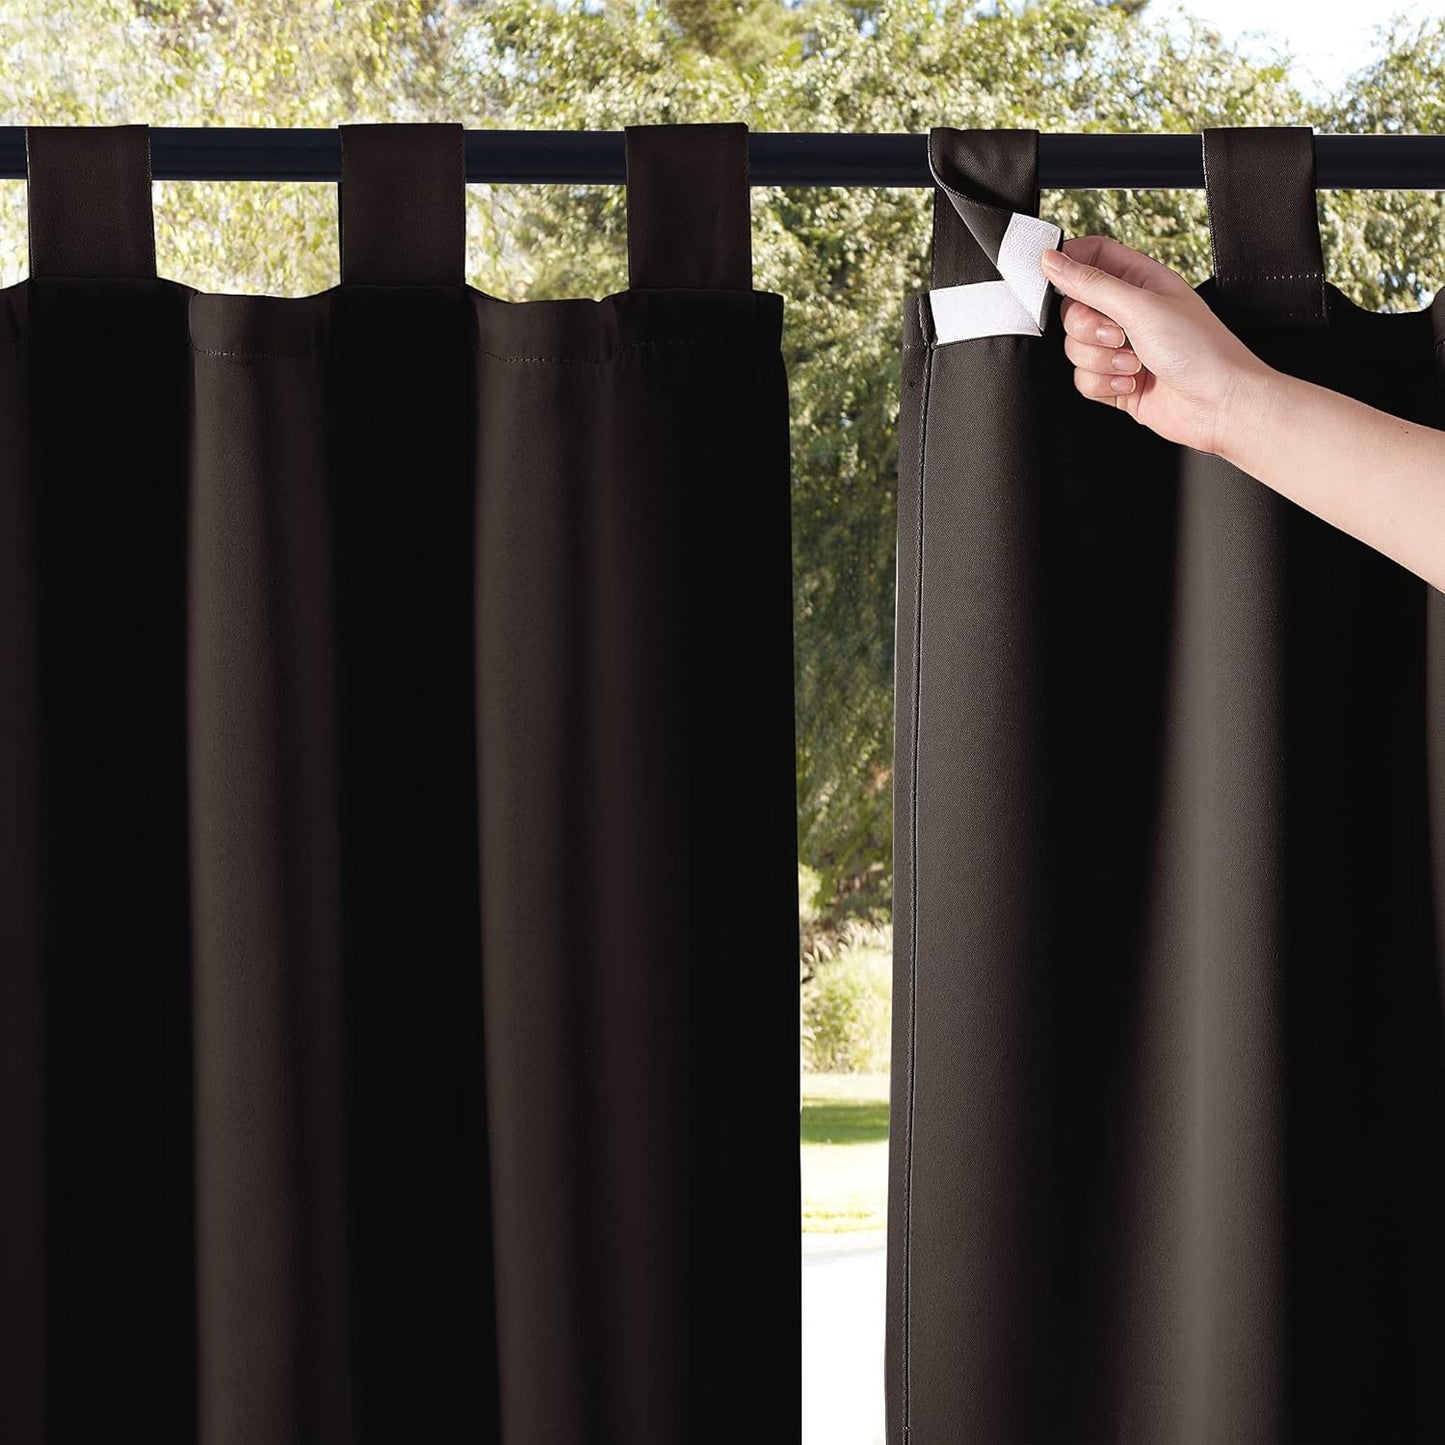 NICETOWN 2 Panels Outdoor Patio Curtainss Waterproof Room Darkening Drapes, Detachable Sticky Tab Top Thermal Insulated Privacy Outdoor Dividers for Porch/Doorway, Biscotti Beige, W52 X L84  NICETOWN Brown W52 X L108 